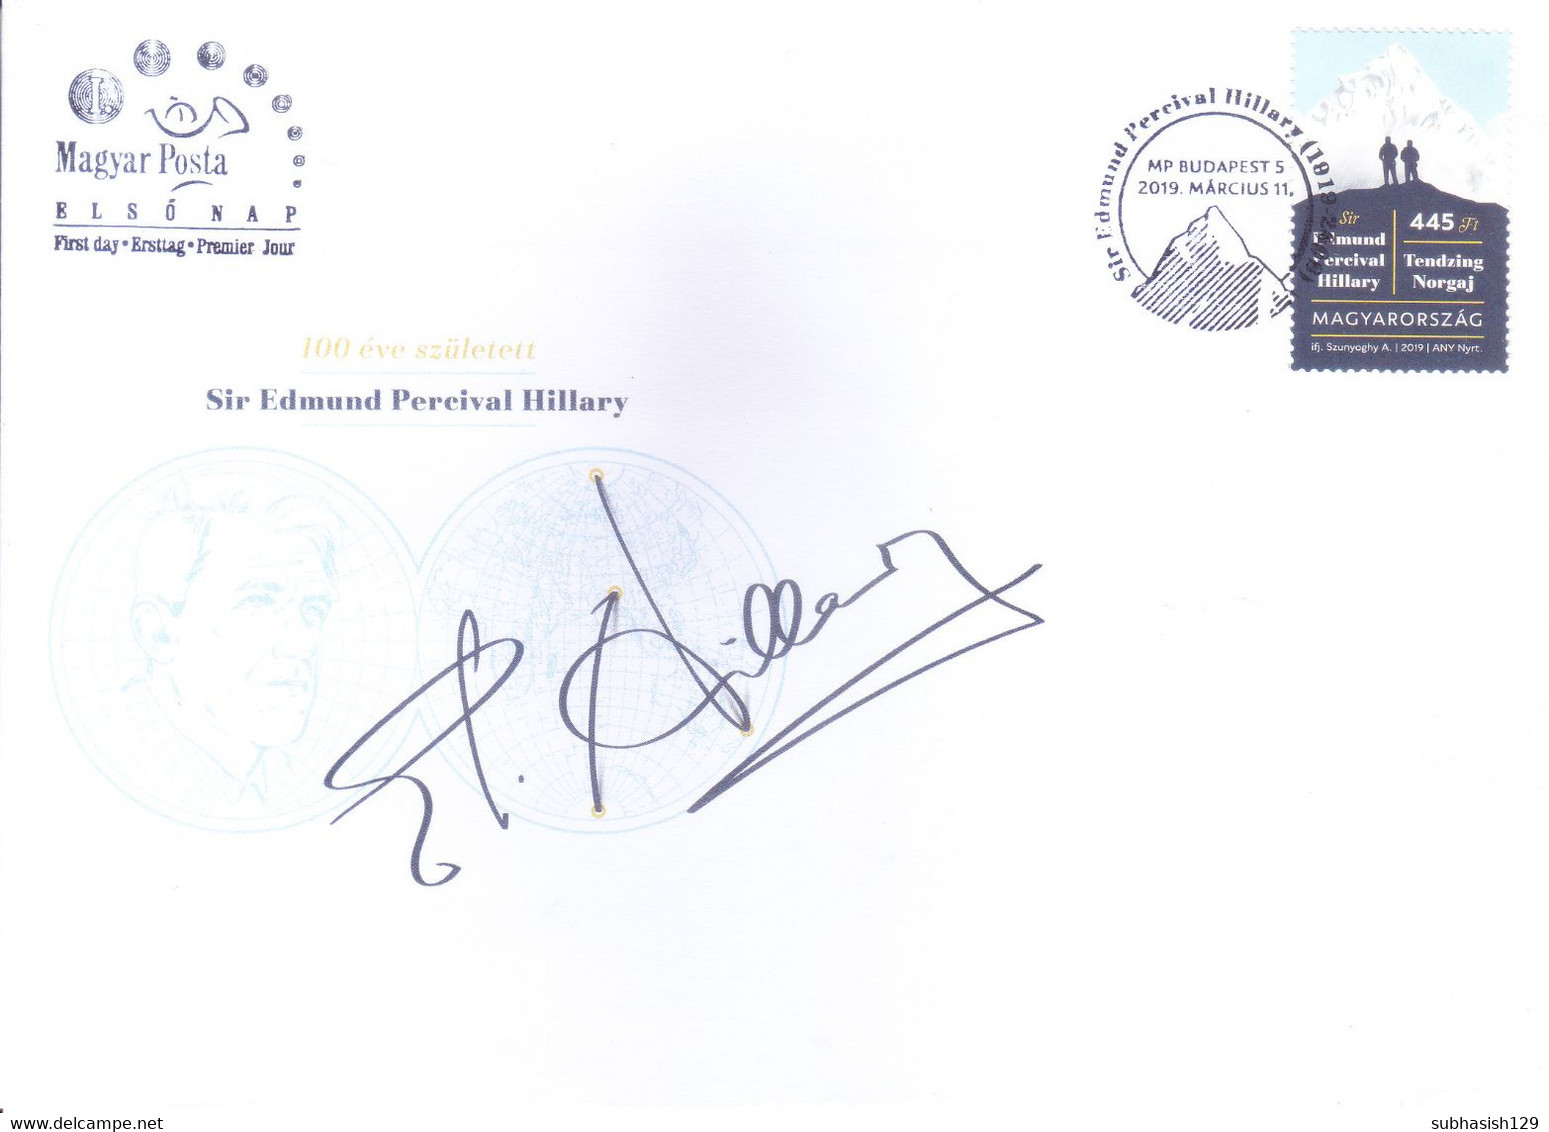 HUNGARY : FIRST DAY COVER : 11 MARCH 2019 : BIRTH CENTENARY OF SIR EDMUND PERCIVAL HILLARY - Covers & Documents